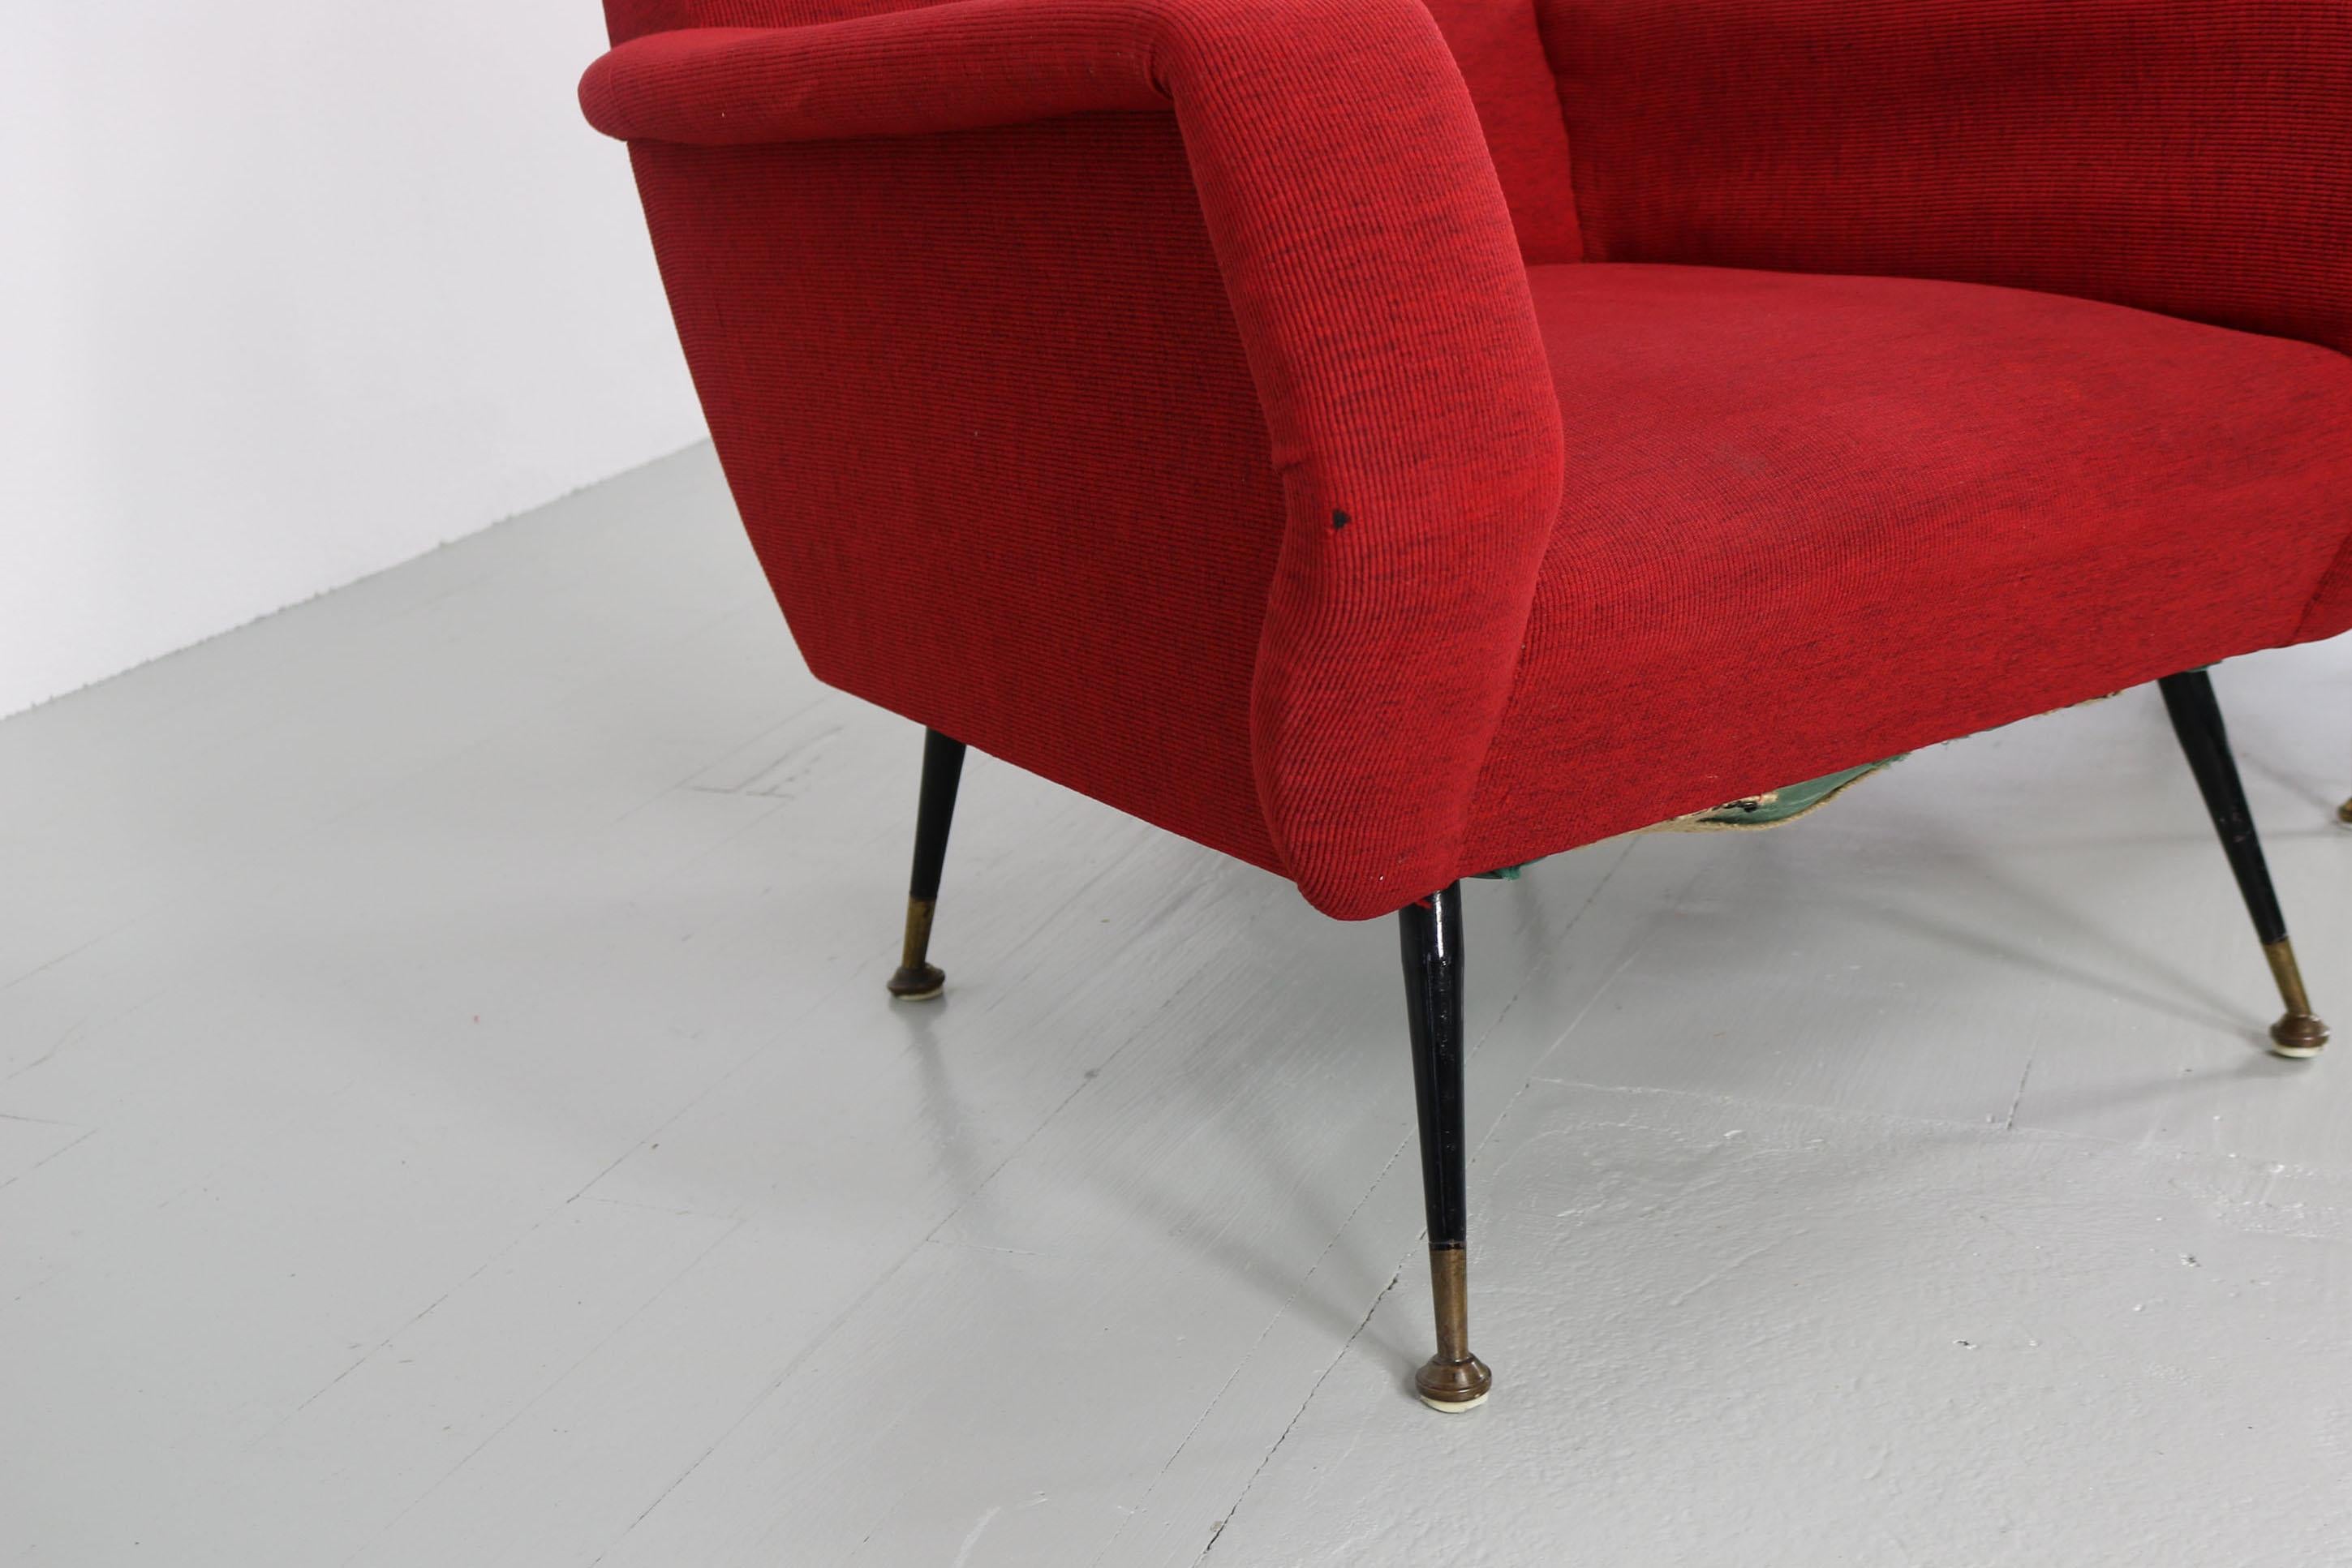 Red Upholstered Armchair with Metal Base, Brass Elements, 1950s For Sale 7